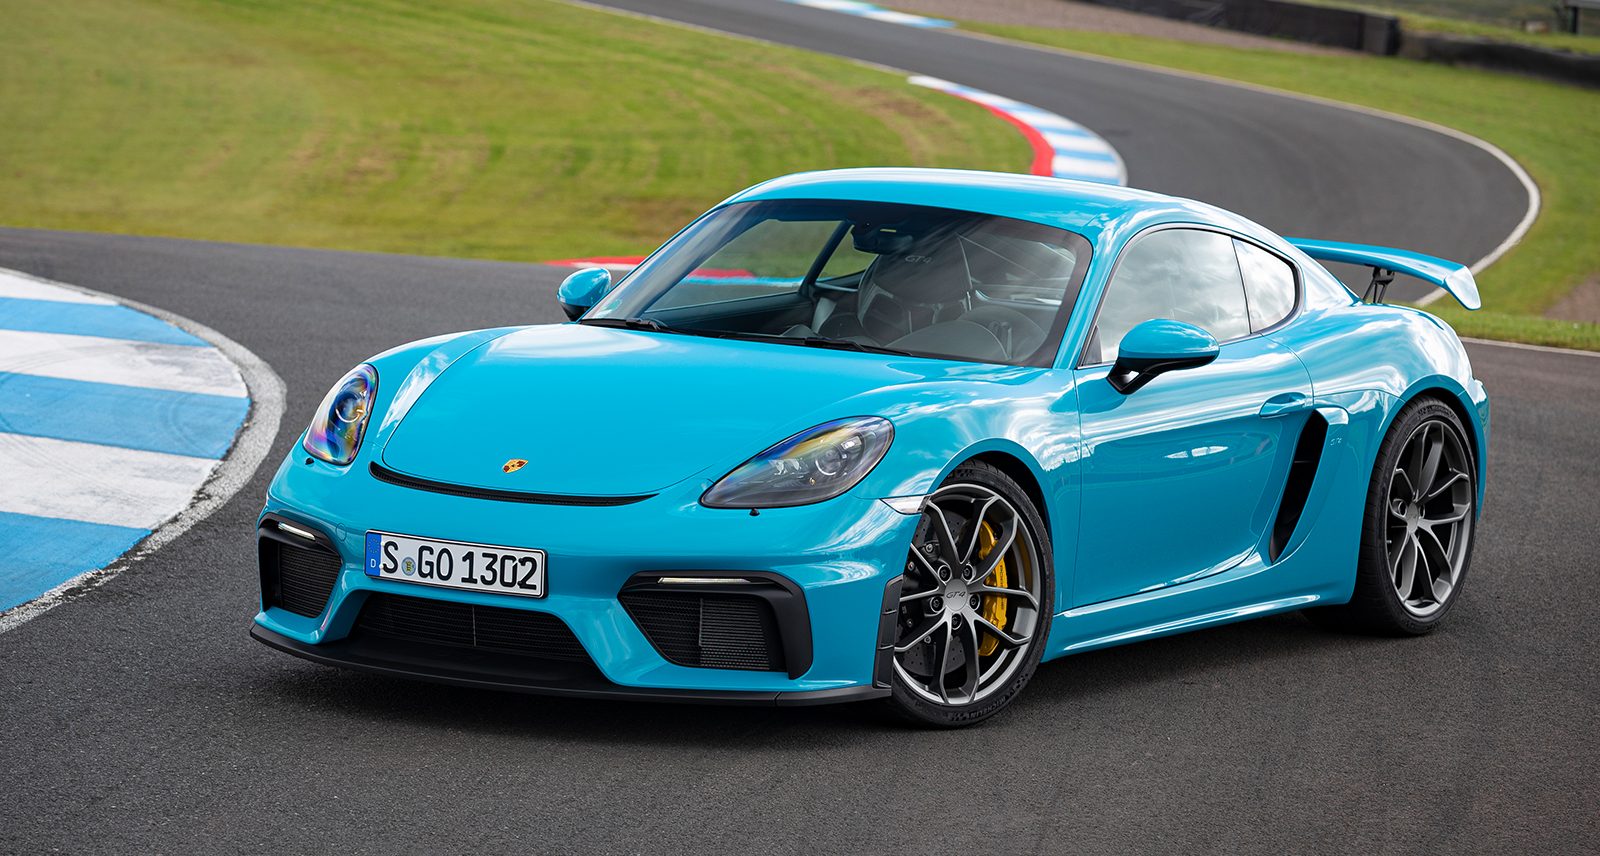 The New Porsche 718 Cayman GT4 Is Probably the Best-Handling Sports Car in Existence Today